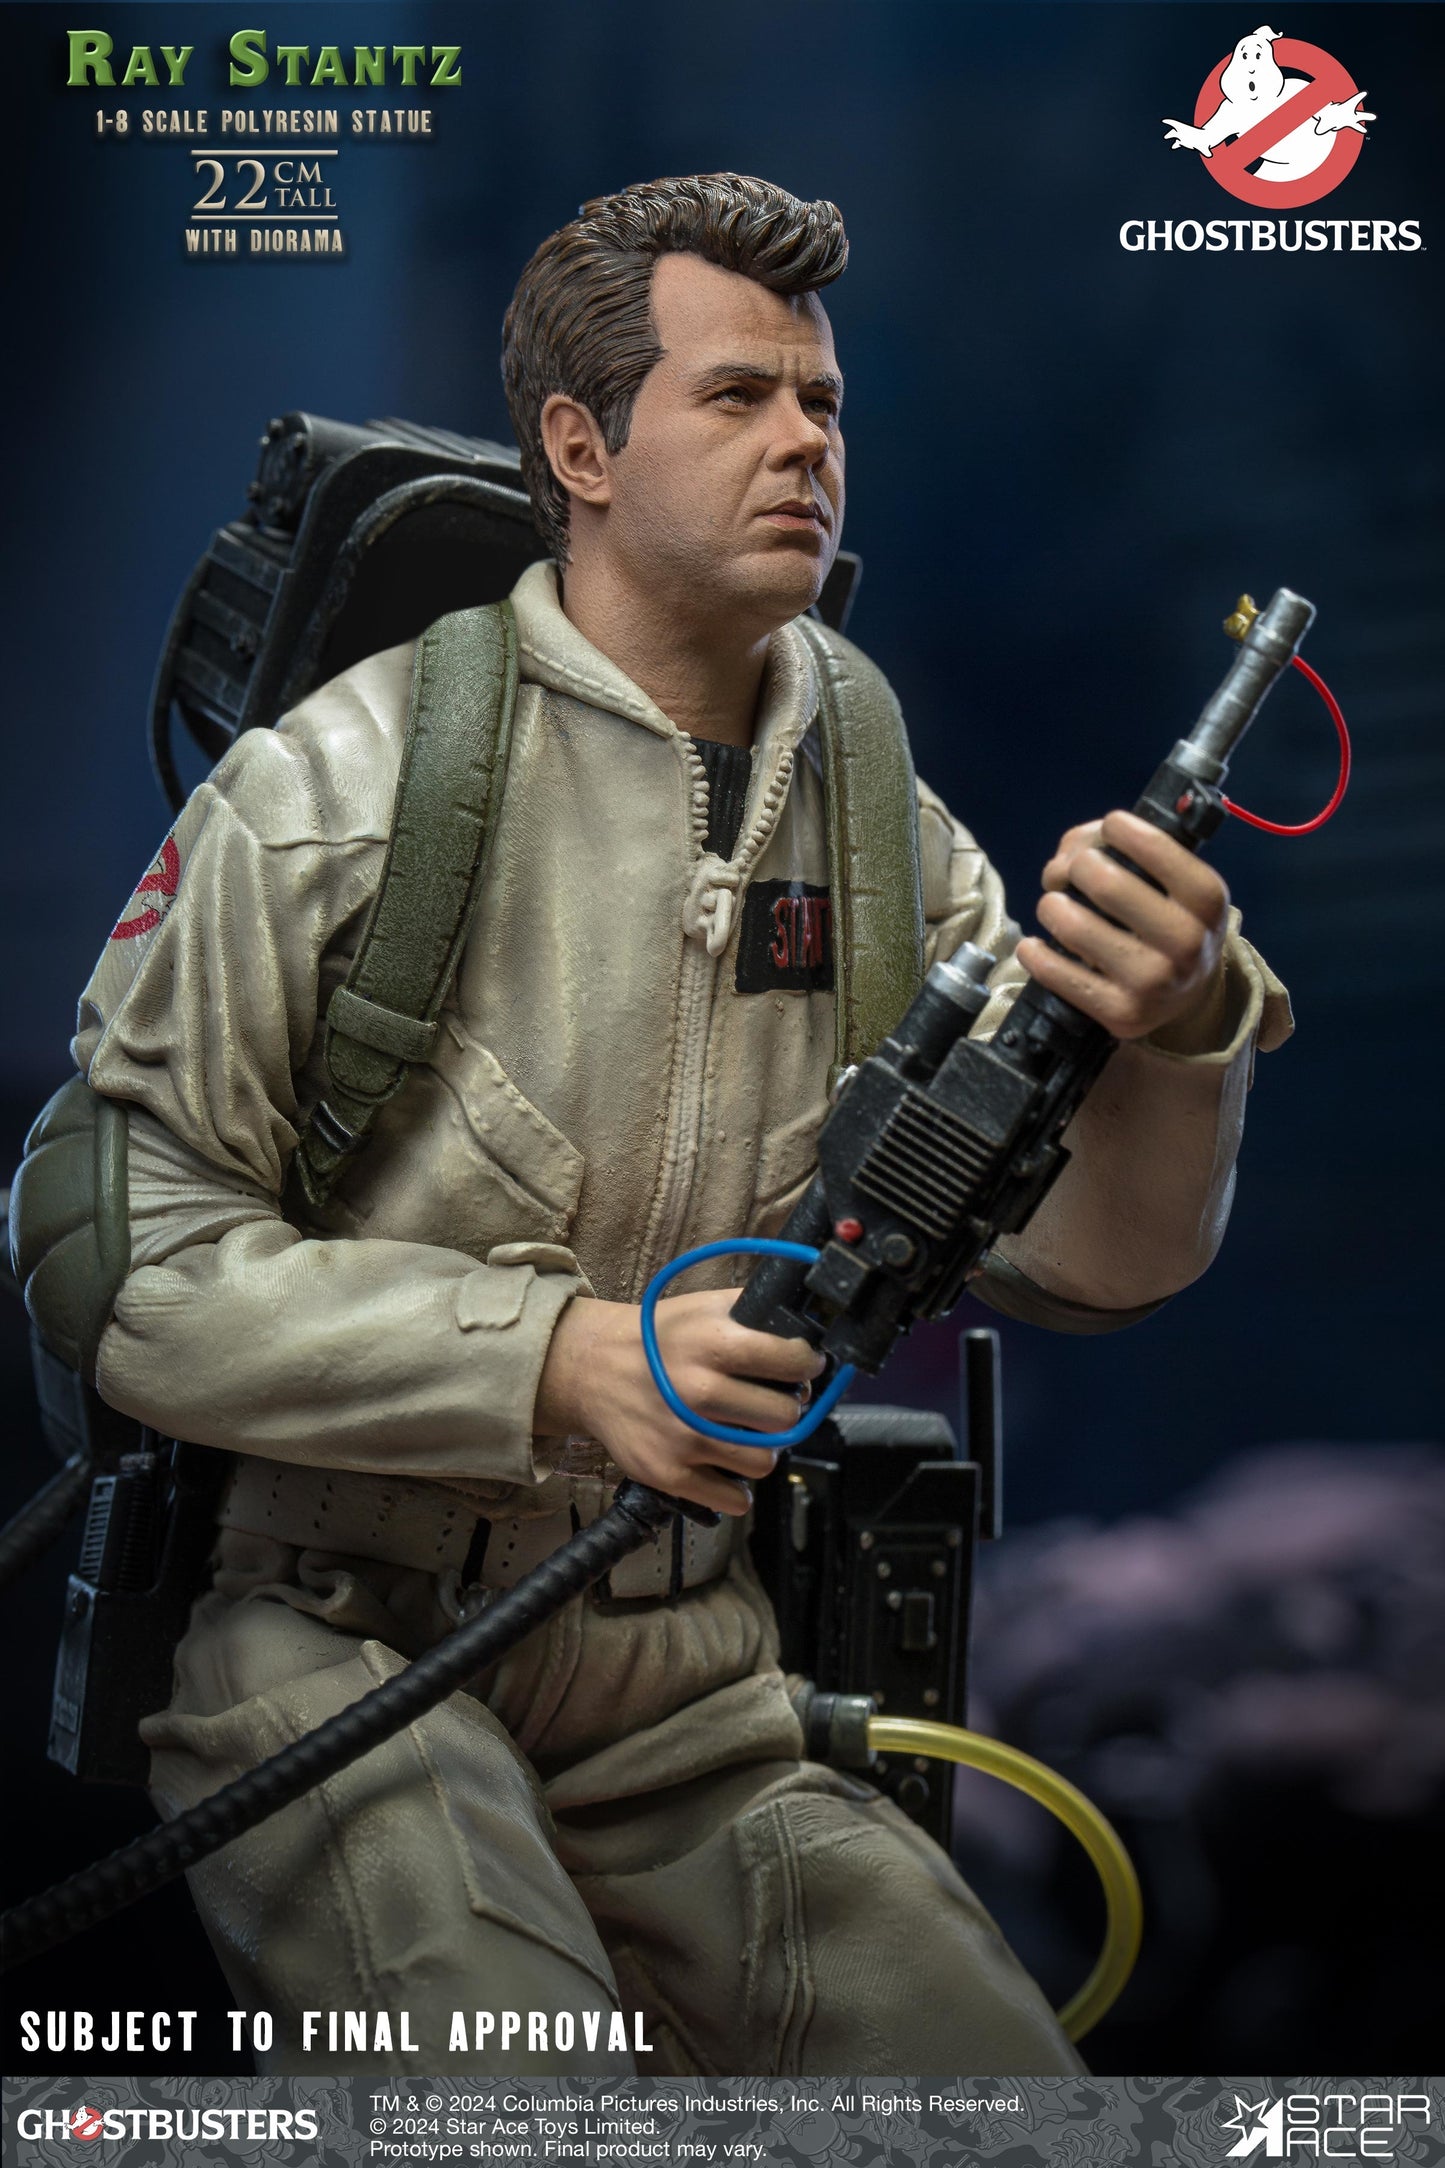 GHOSTBUSTERS RAY STANTZ 1/8 SCALE POLYRESIN STATUE